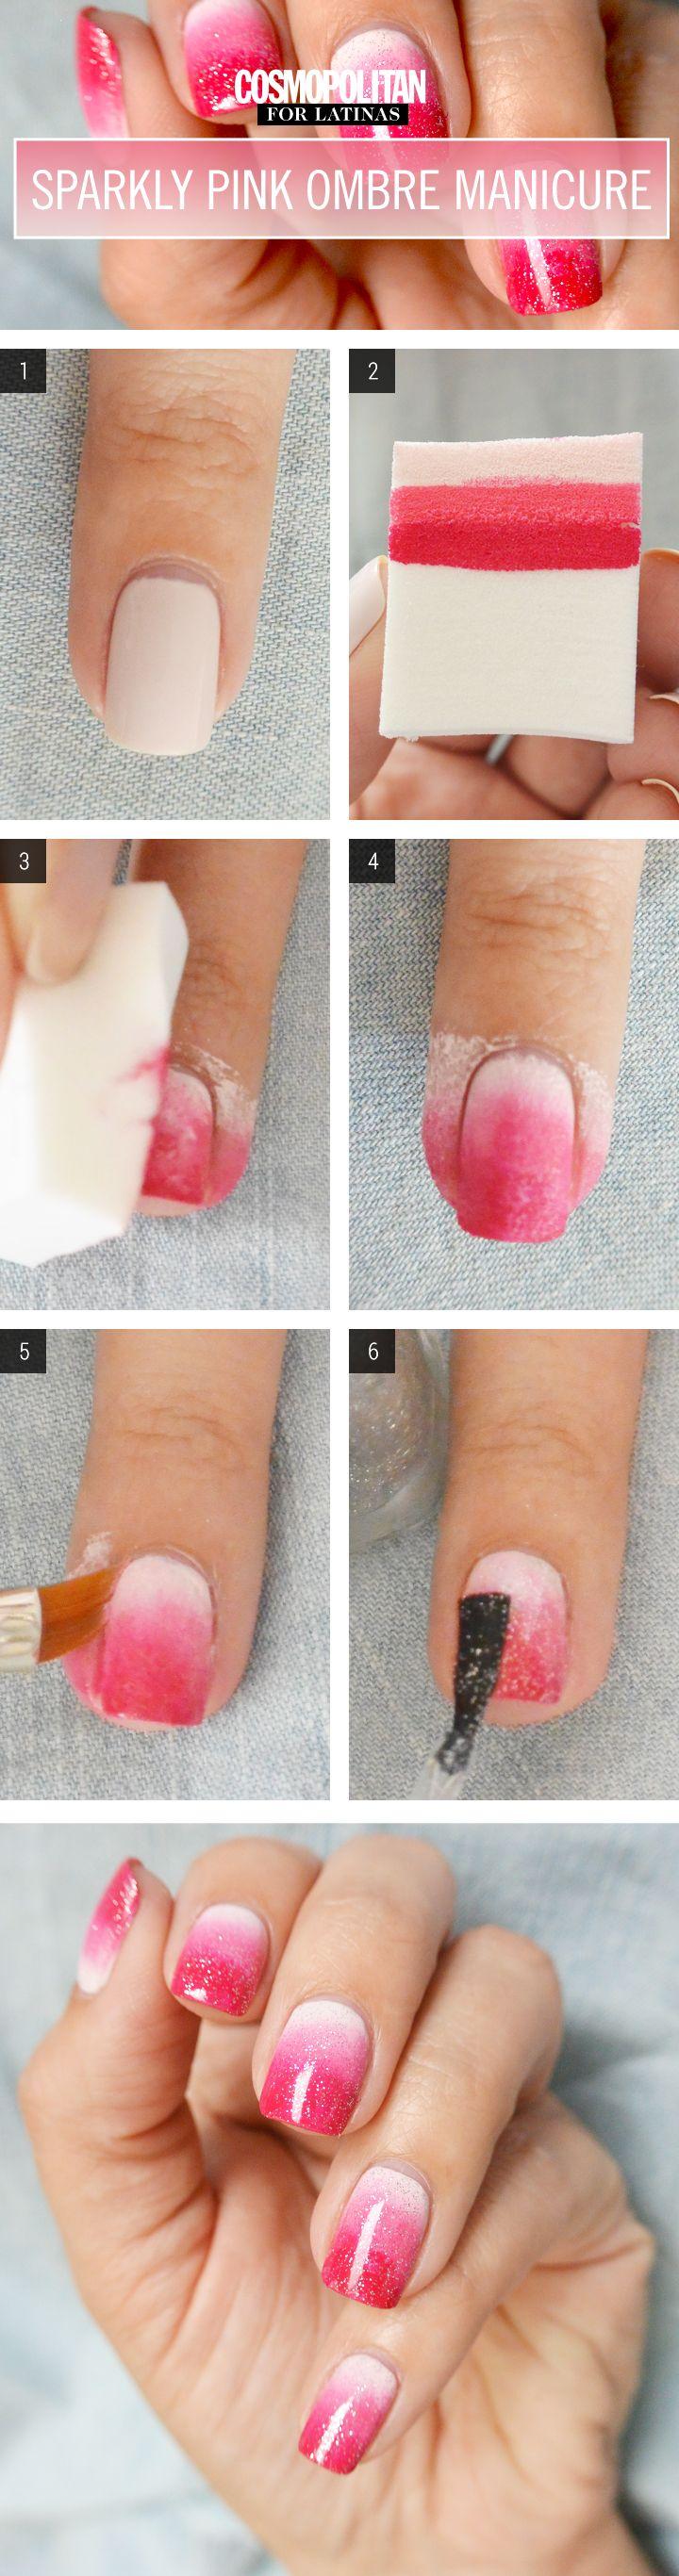 Hochzeit - Nail Art How-To: Sparkly Pink Ombre Manicure